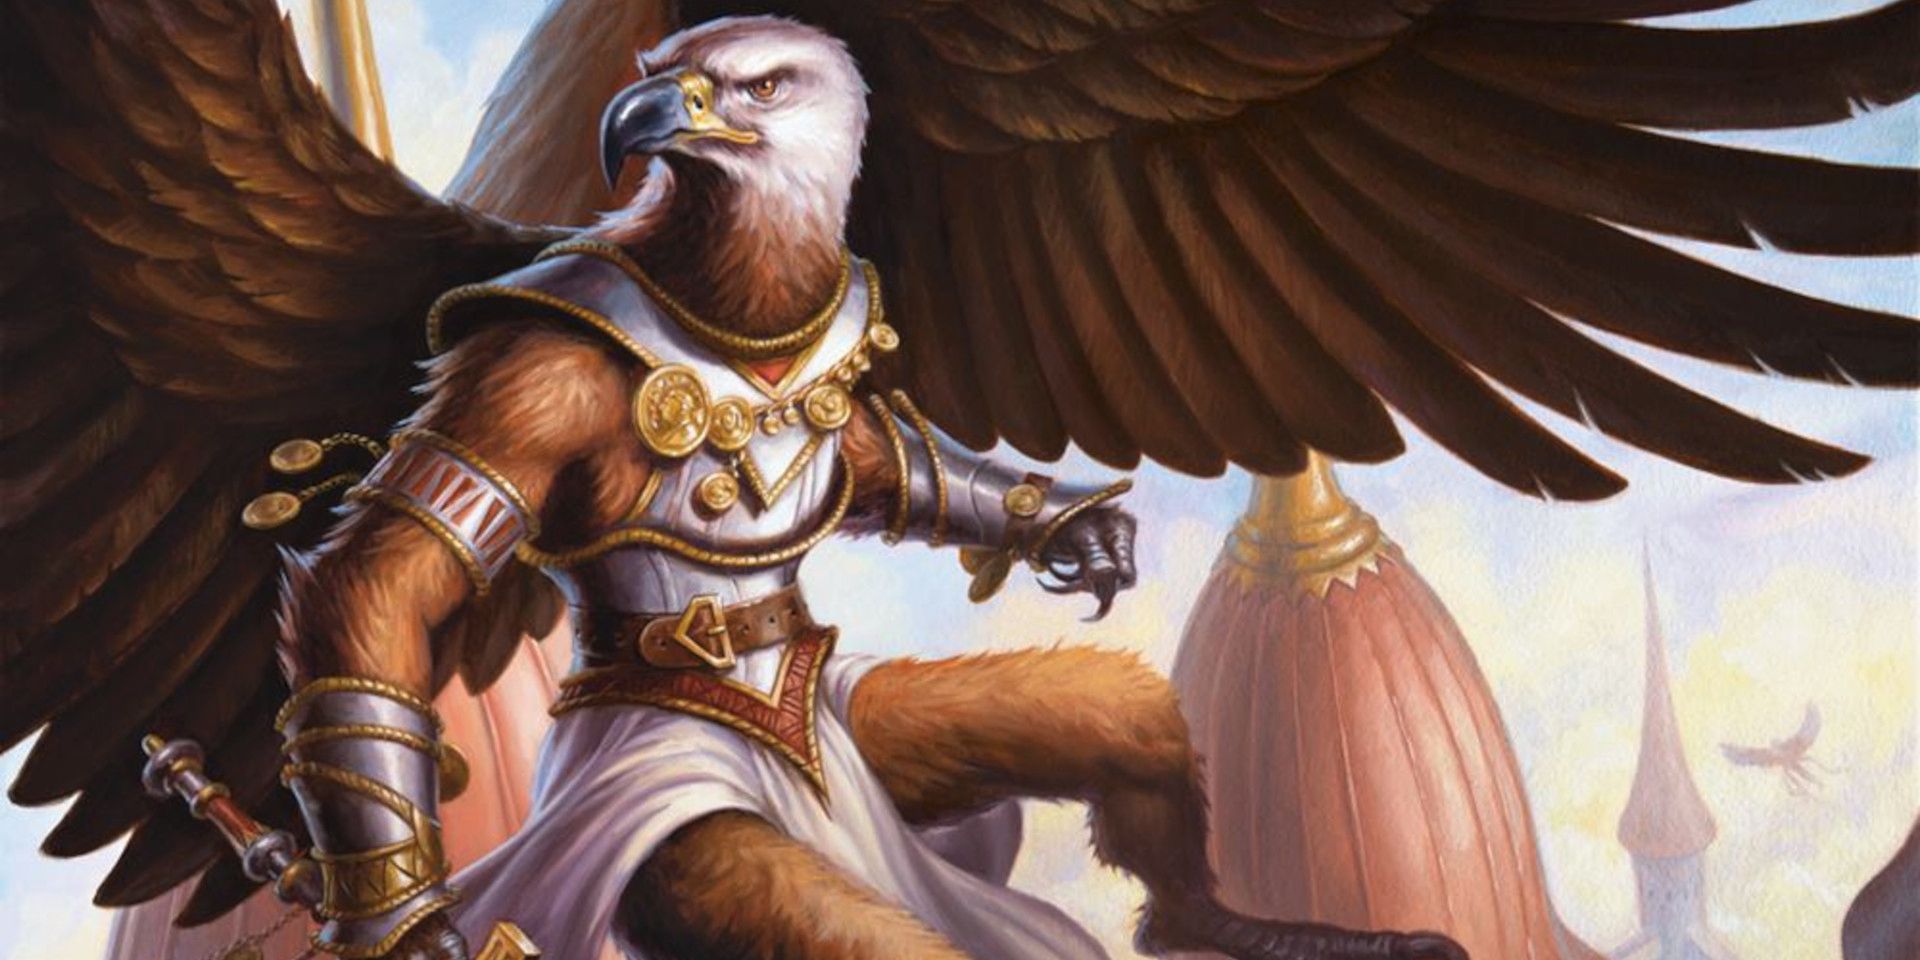 An eagle-based aarakocra hovers above a city's spires, wearing a white robe in art from DnD.